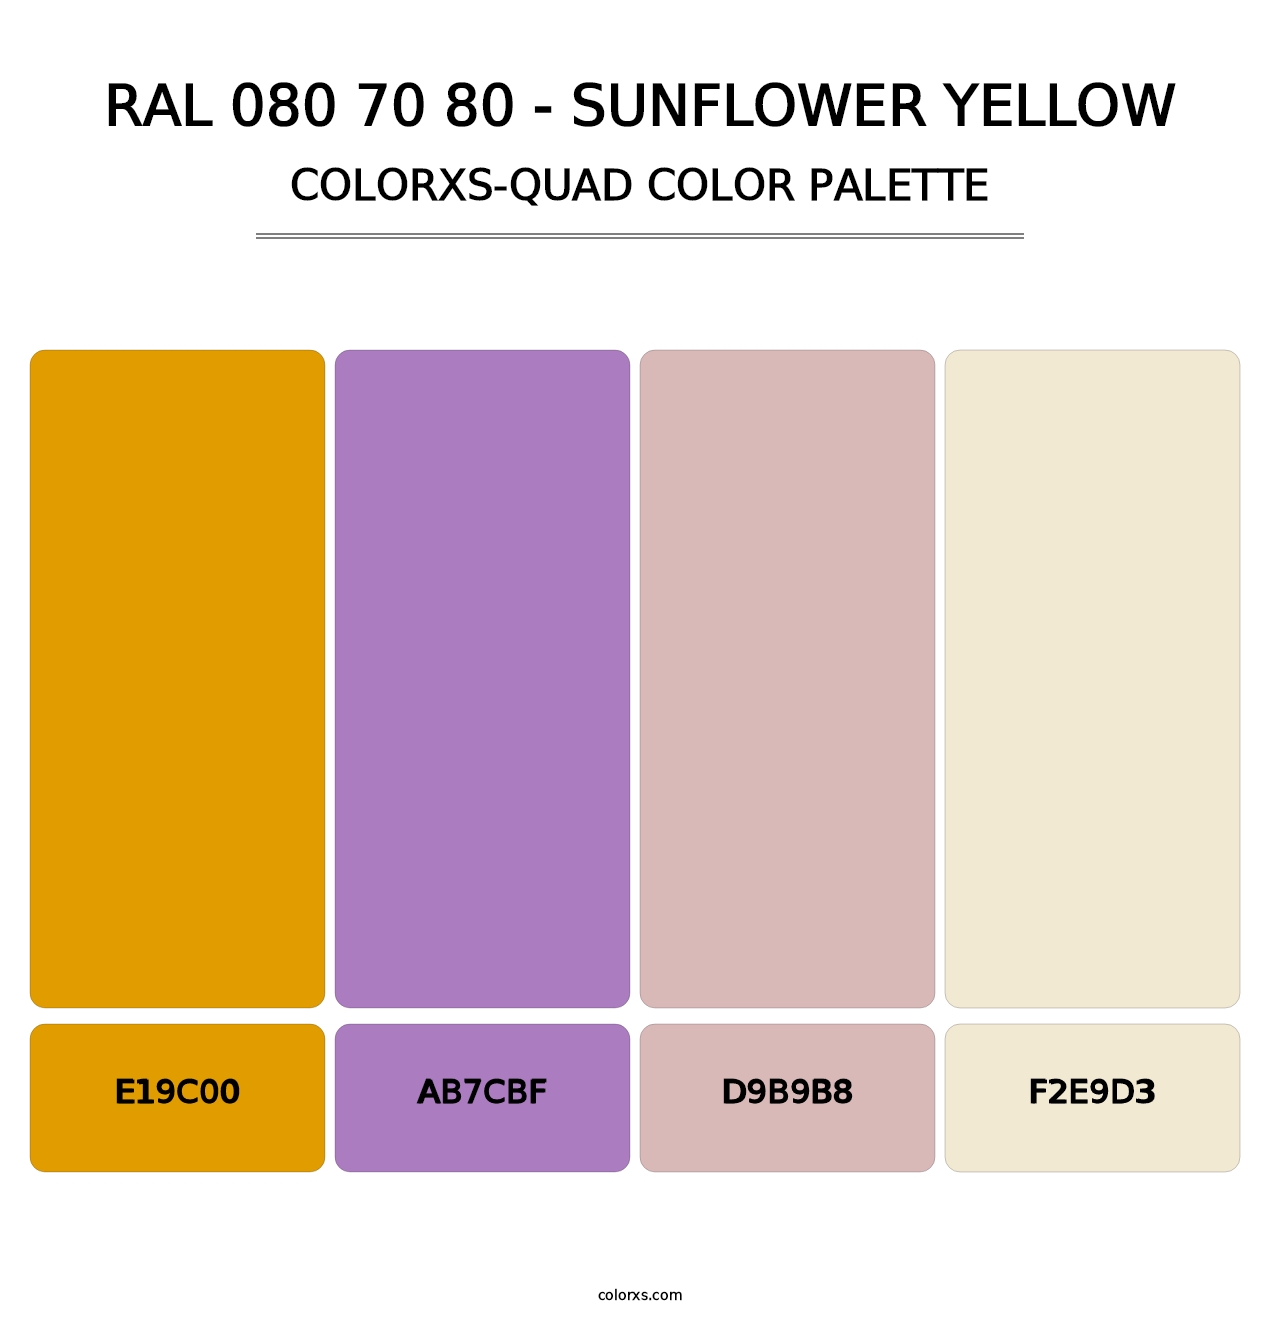 RAL 080 70 80 - Sunflower Yellow - Colorxs Quad Palette